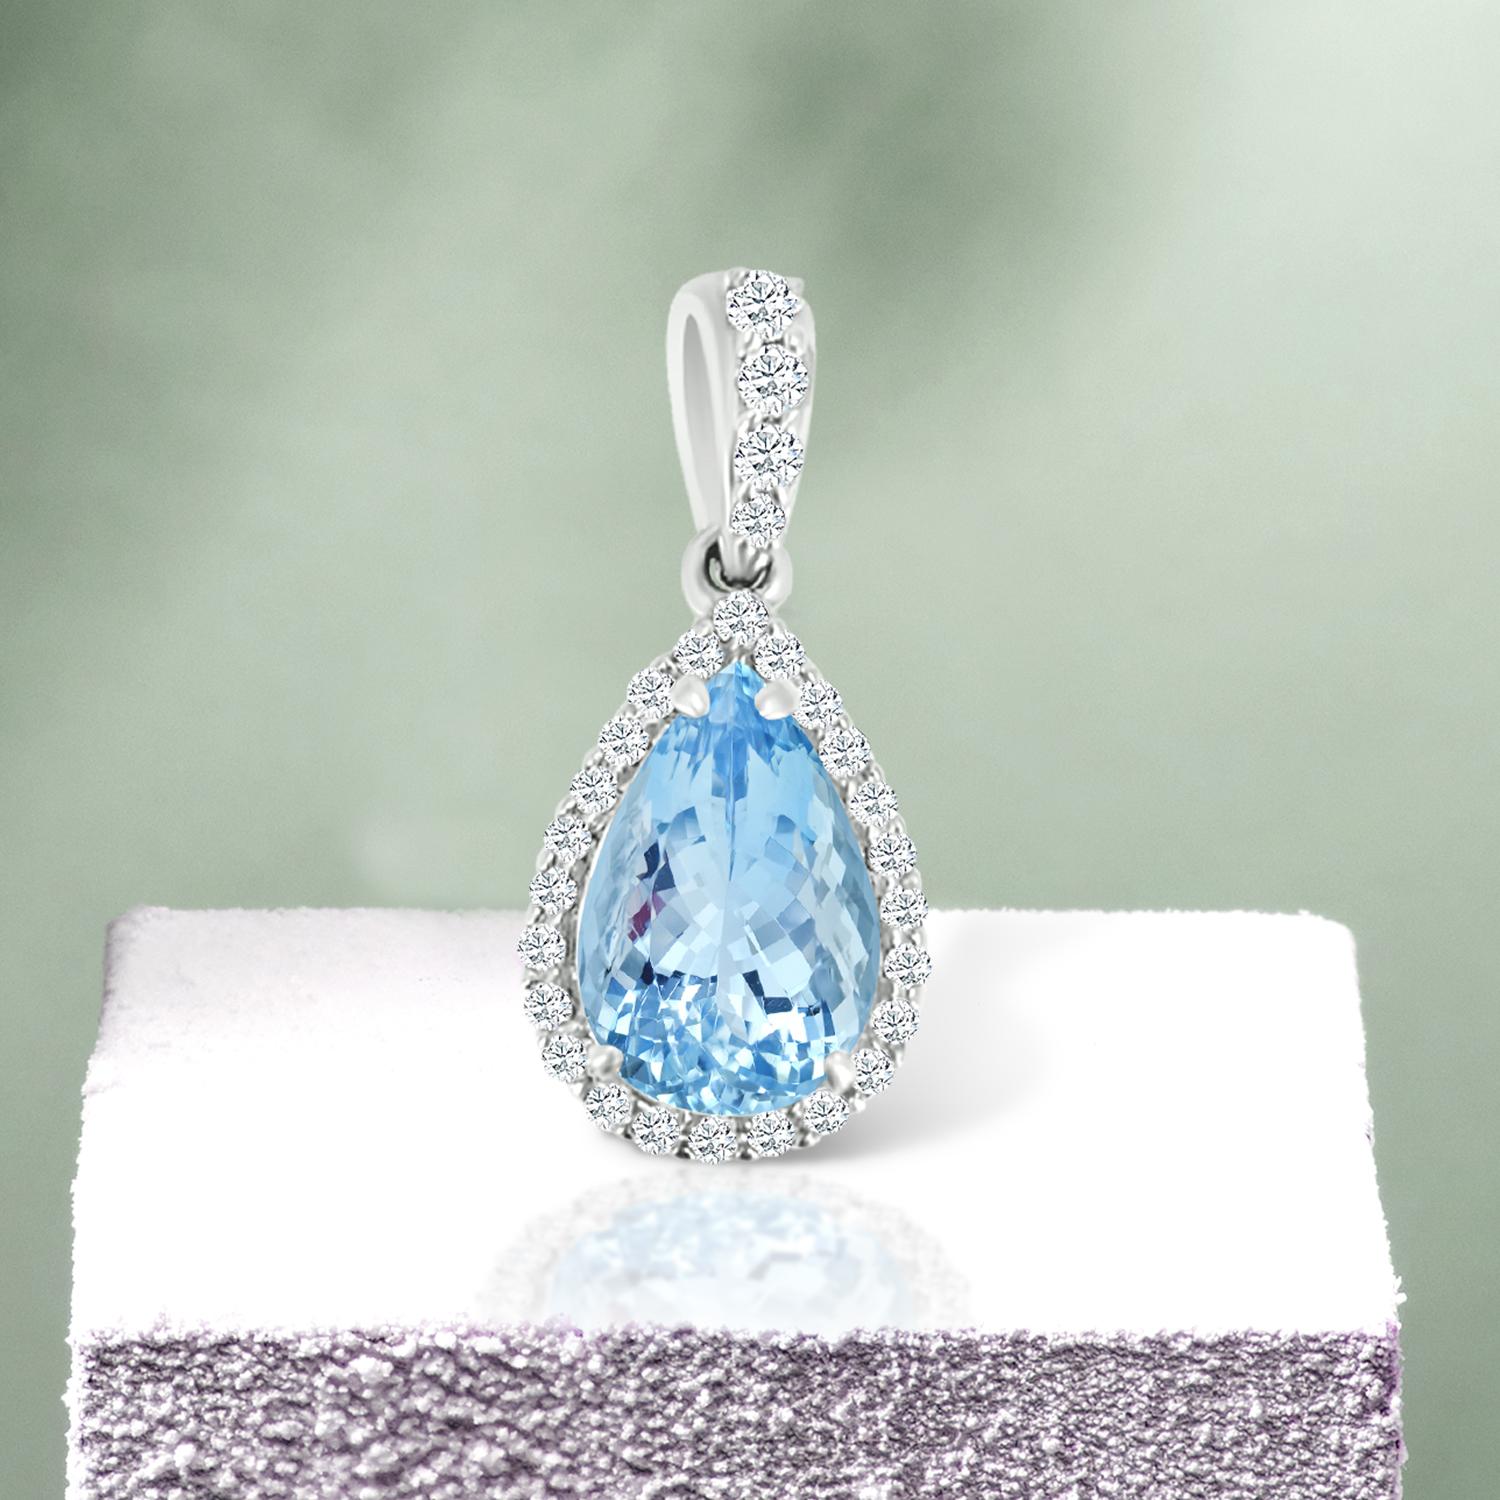 Modern 14k White Gold 0.92cts Aquamarine and Diamond Pendant, Style#TS1234AQP 22053/4 For Sale